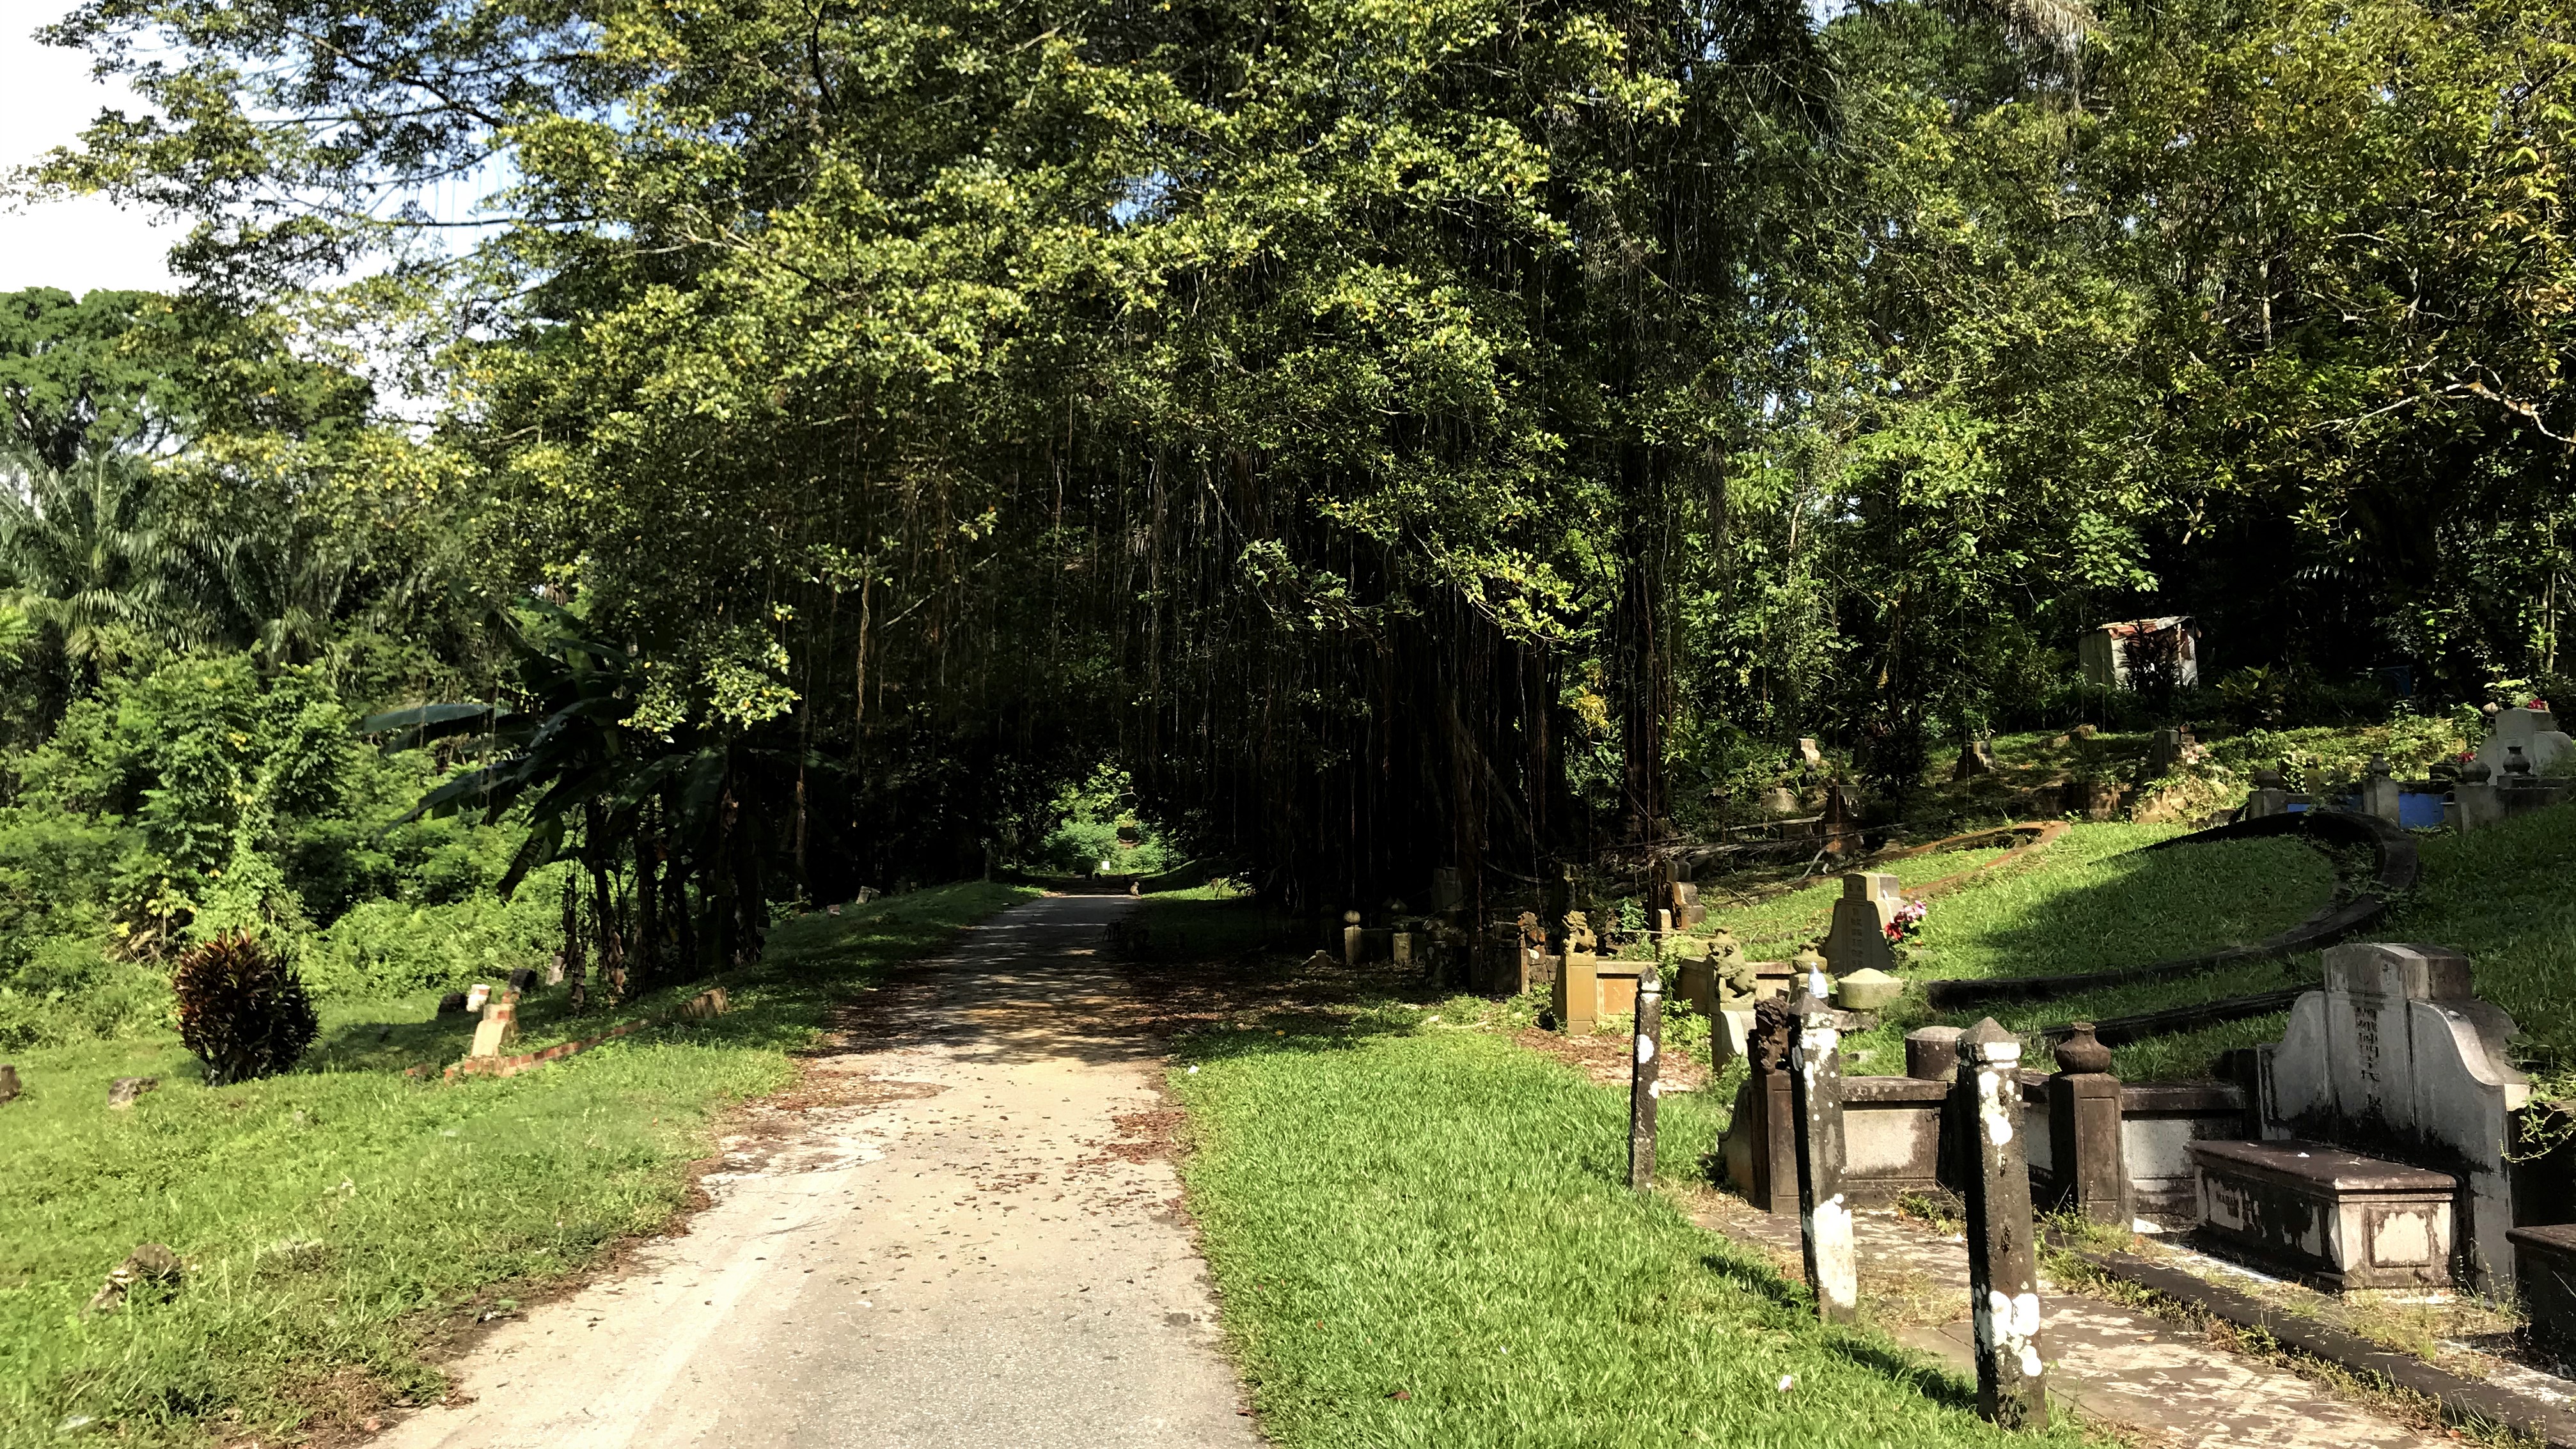 Take a cemetery walk of history, art and nature at Bukit Brown. Photo by Lin Yanqin